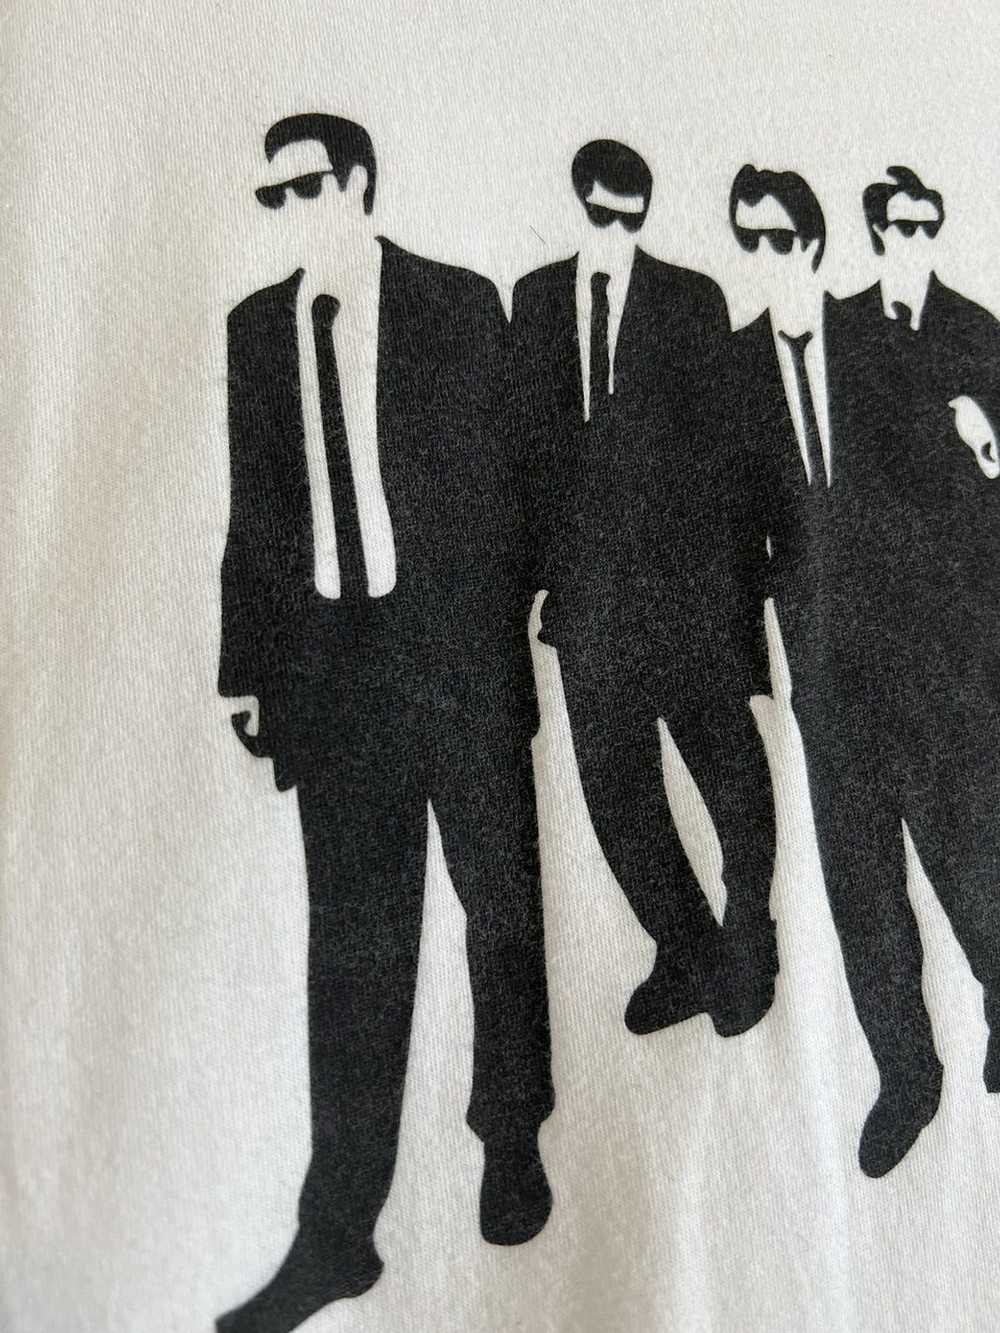 Kith Kith just us reservoir dogs t shirt size m - image 5